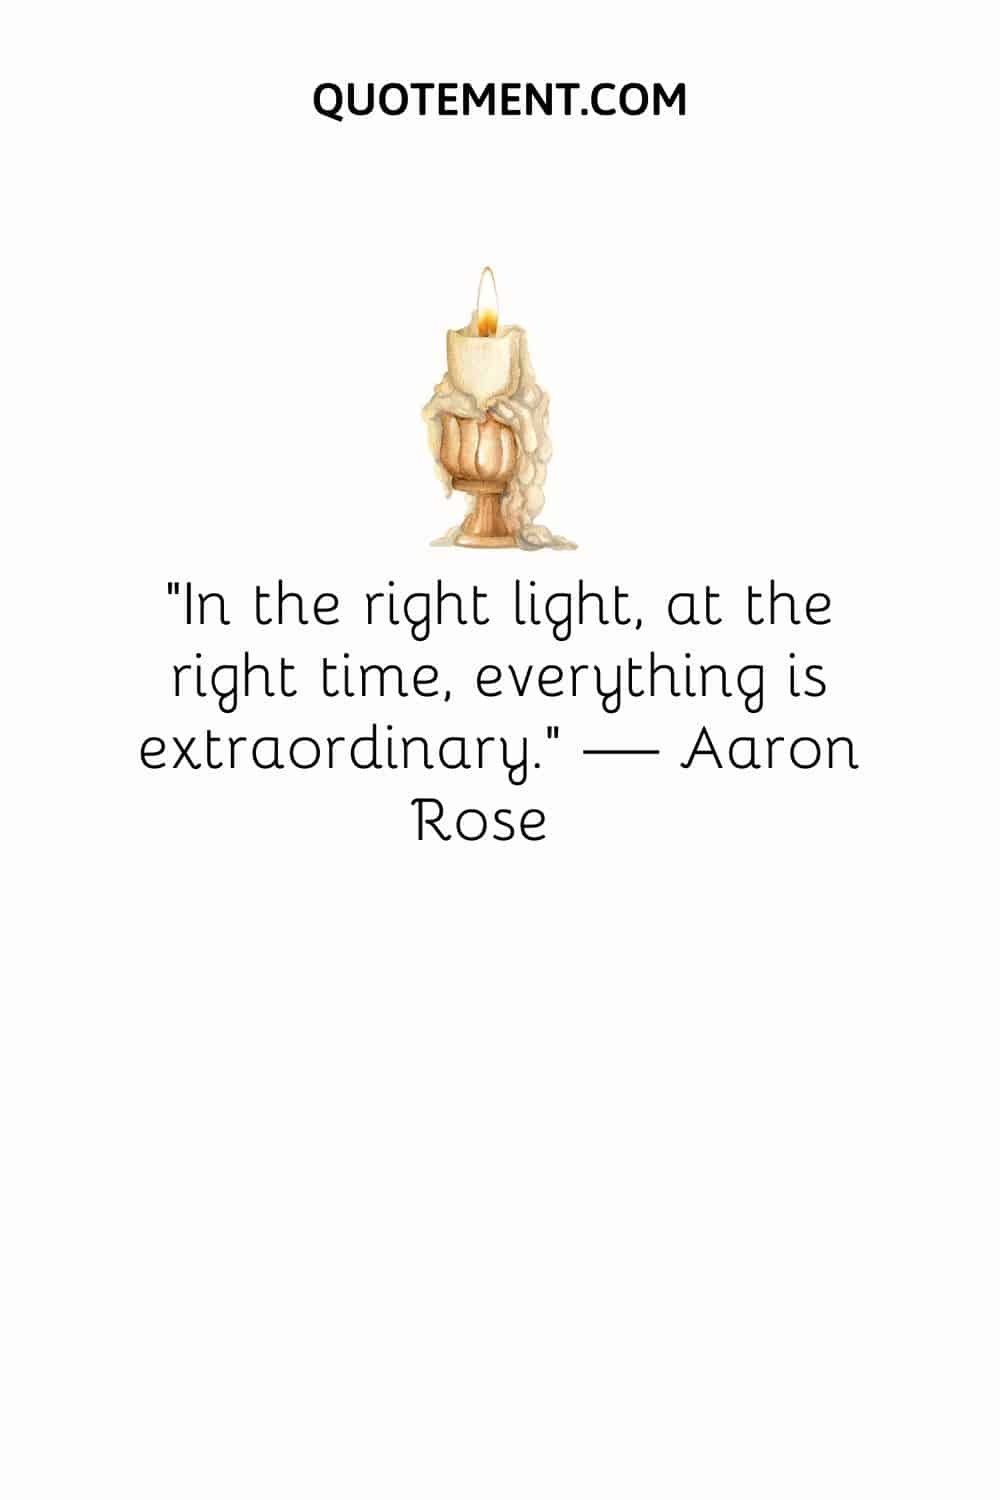 “In the right light, at the right time, everything is extraordinary.” — Aaron Rose